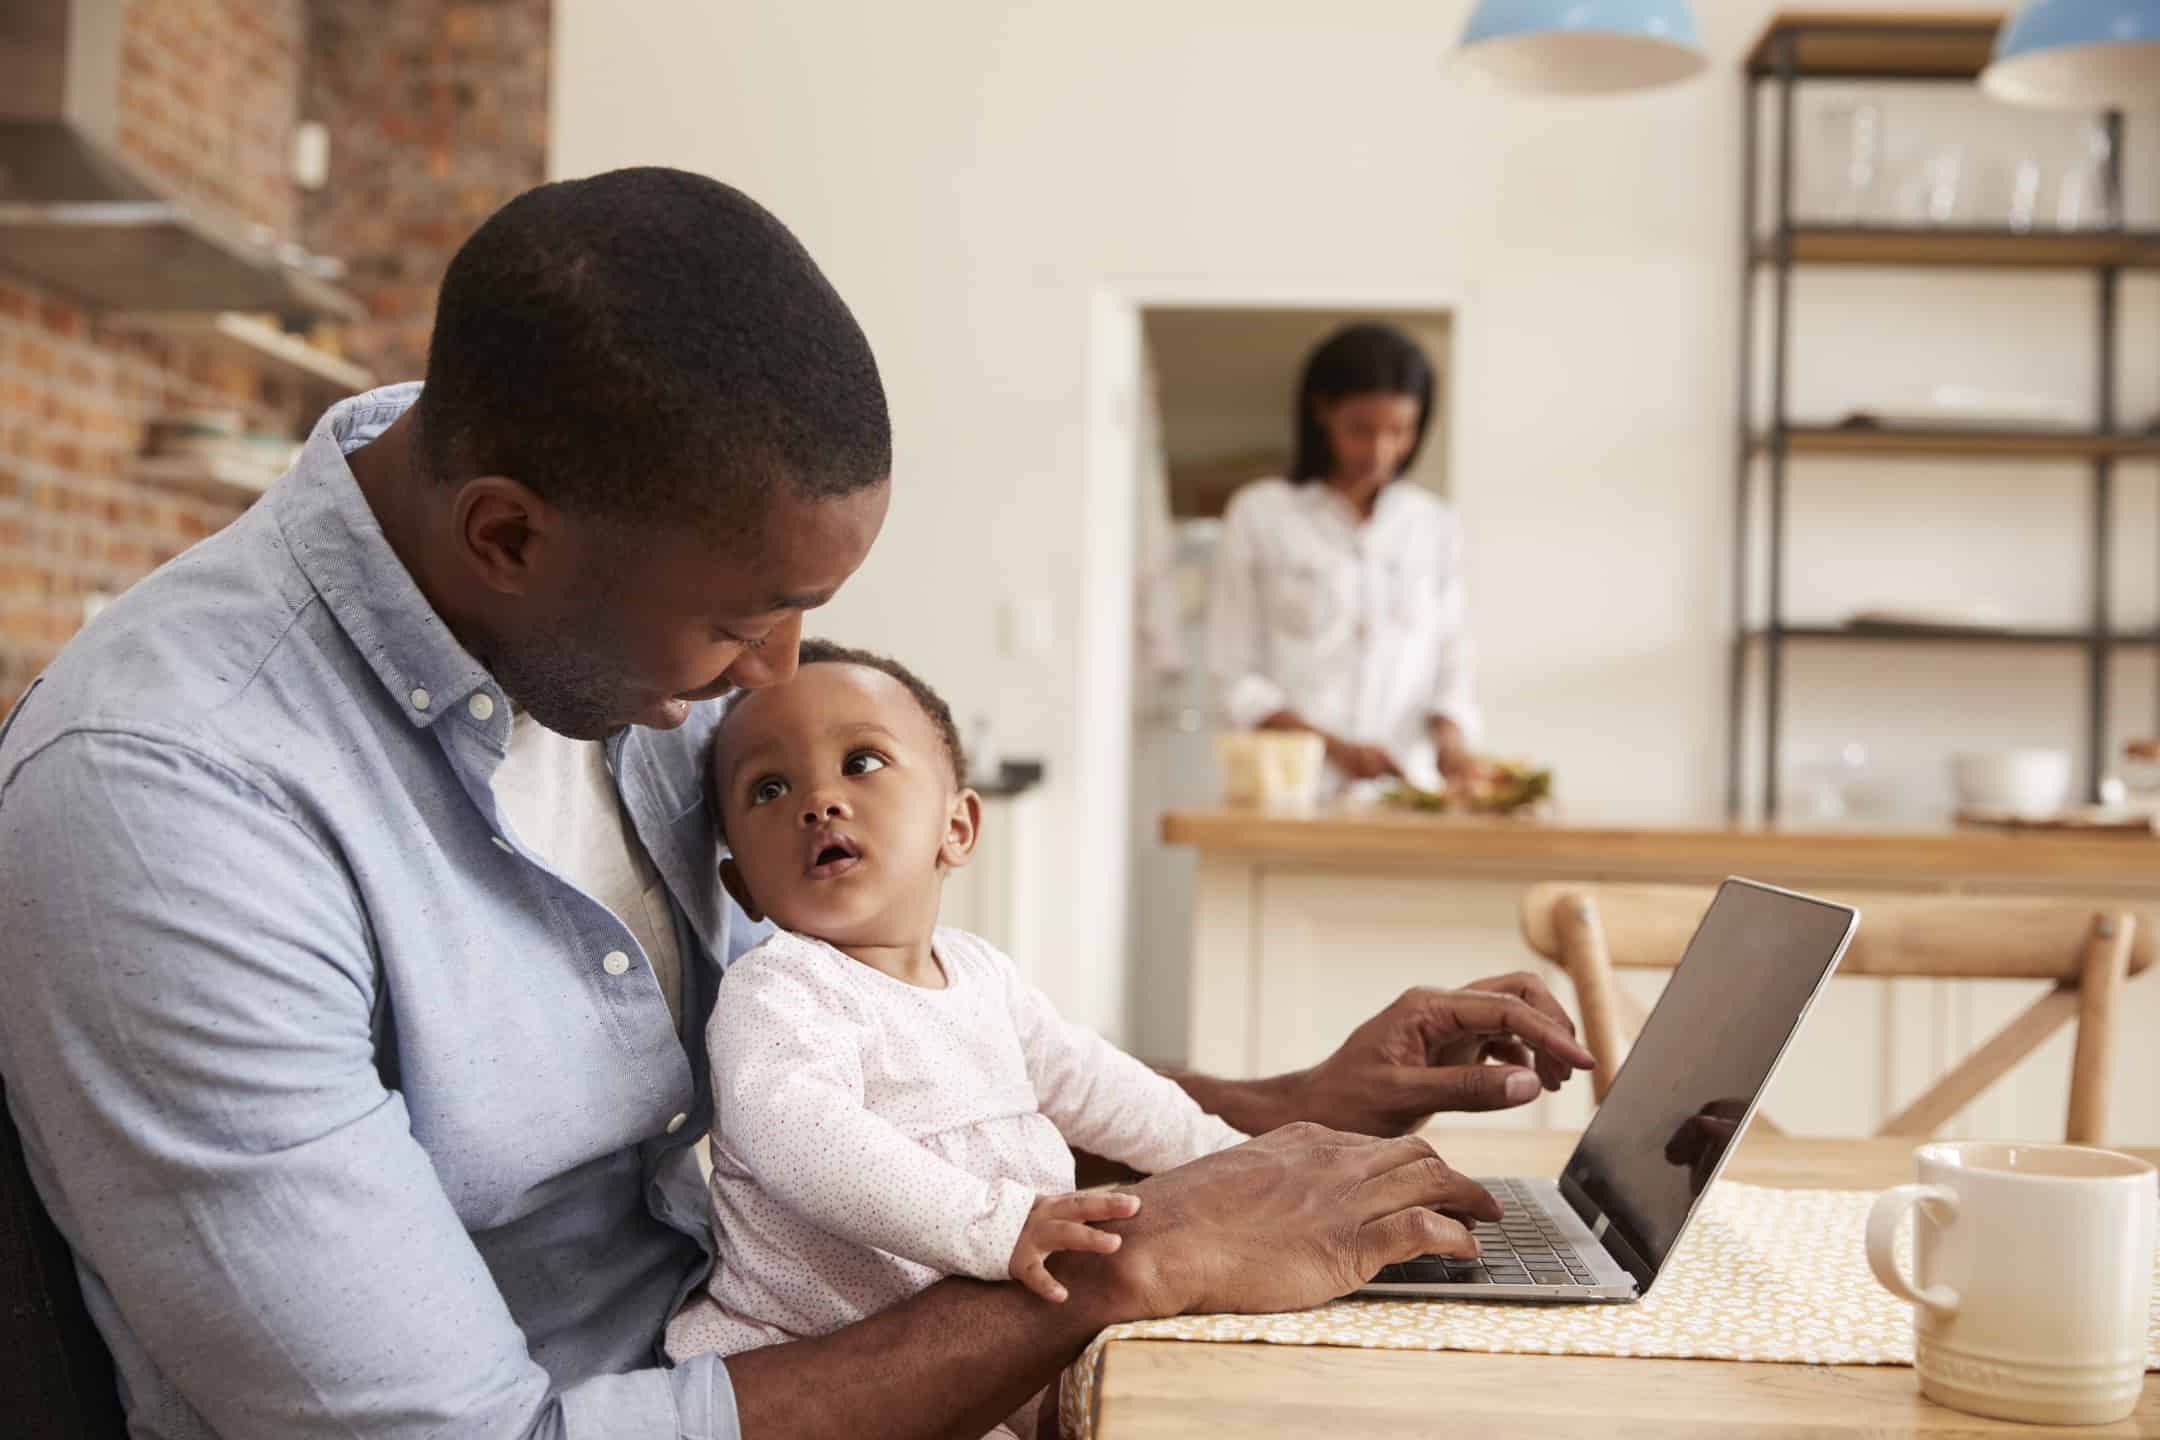 Man Working on Computer at Kitchen Table with Baby Daughter in His Lap